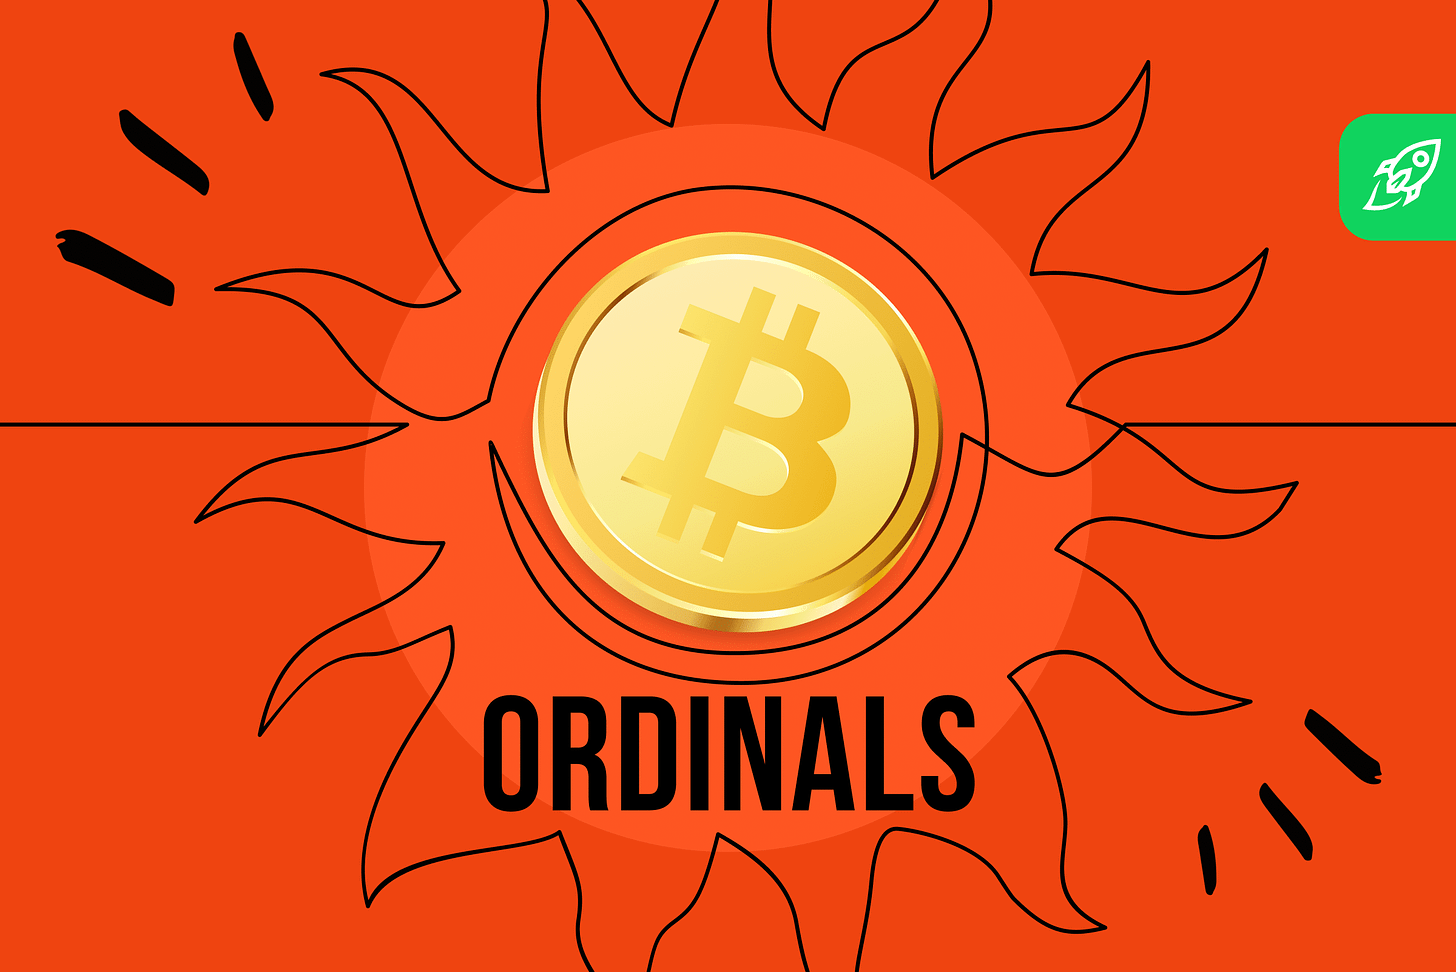 Bitcoin NFT's: Full Guide to Bitcoin Ordinals